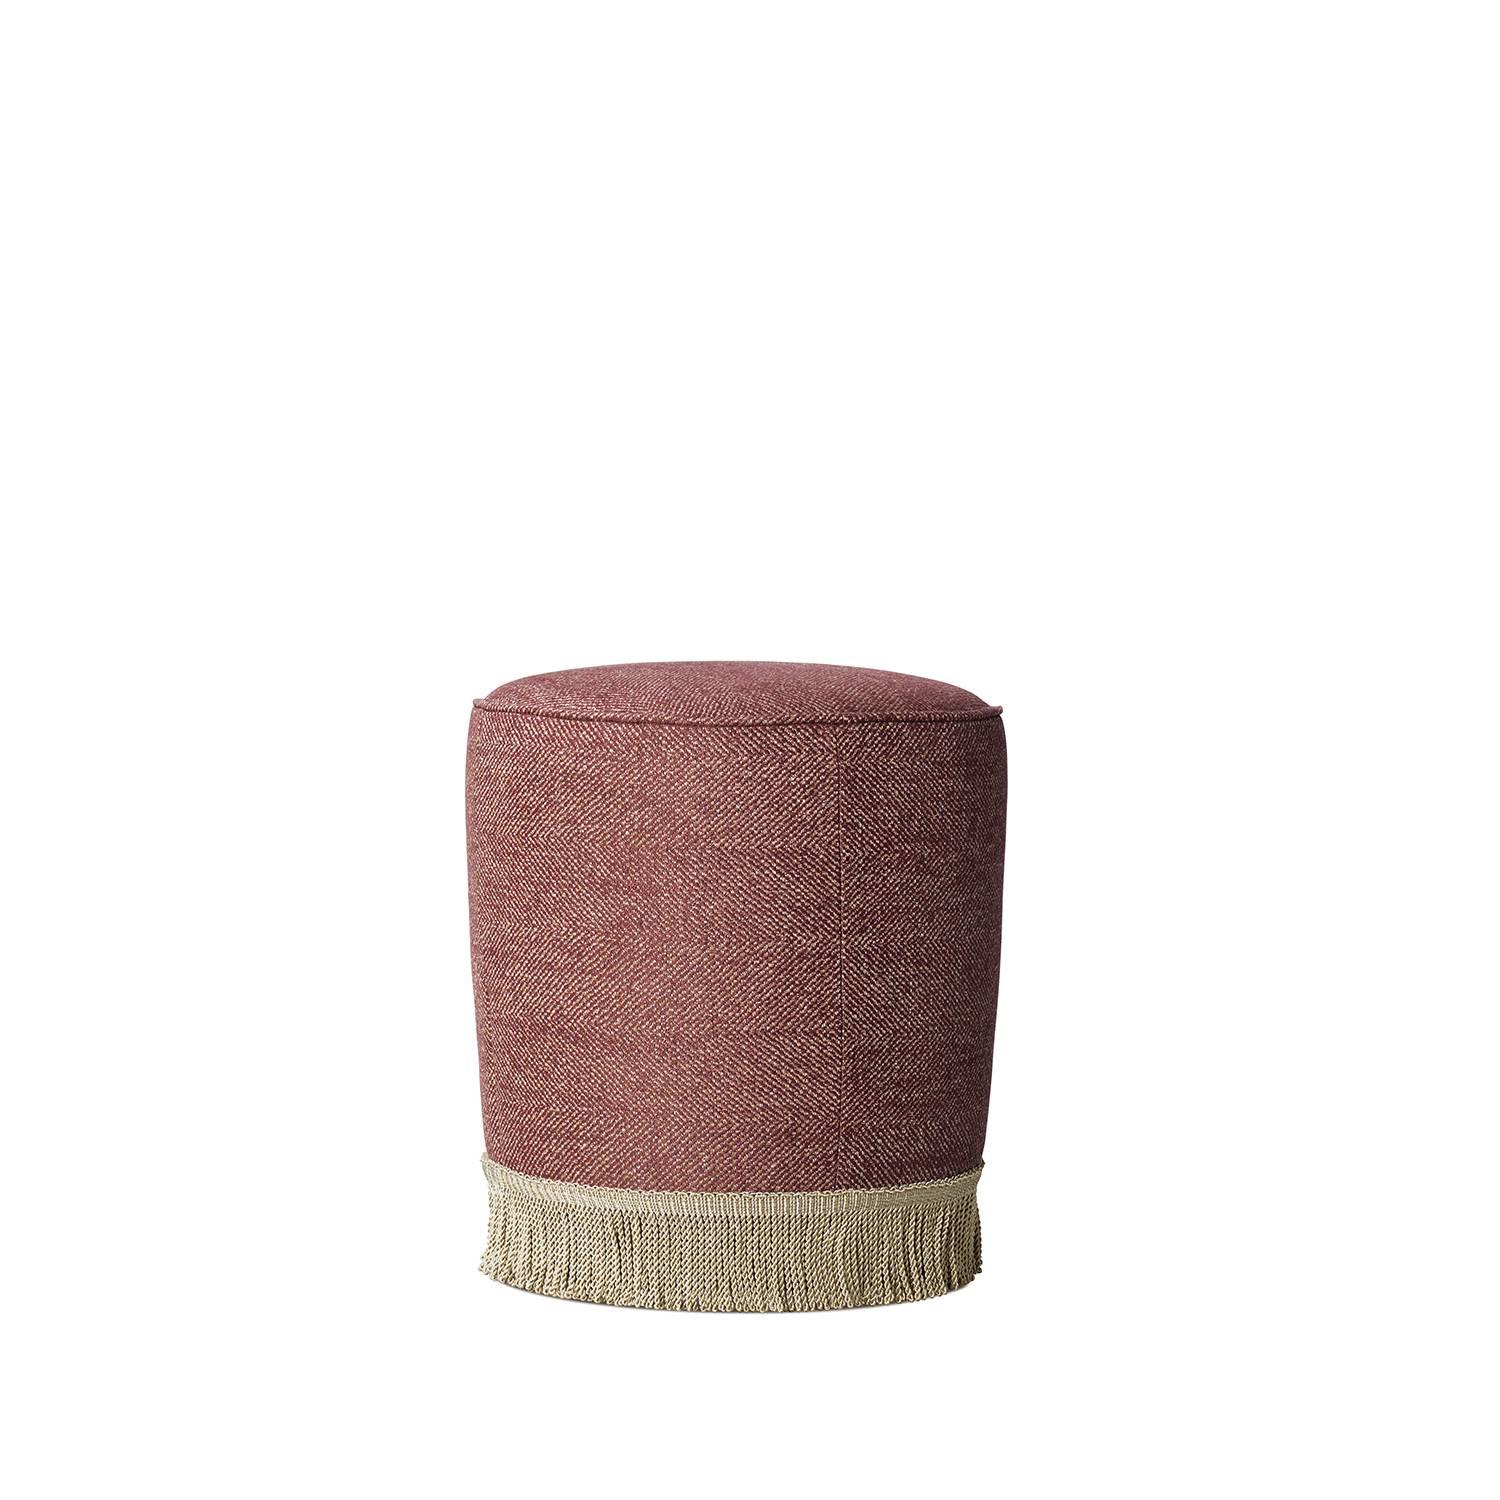 Designed as an informal seating piece, this pouf is a comfortable and functional addition to a living or lounge area. Its distinctive fringe inspired by the 20th century styles creates a light levitating look that is perfectly complemented by the